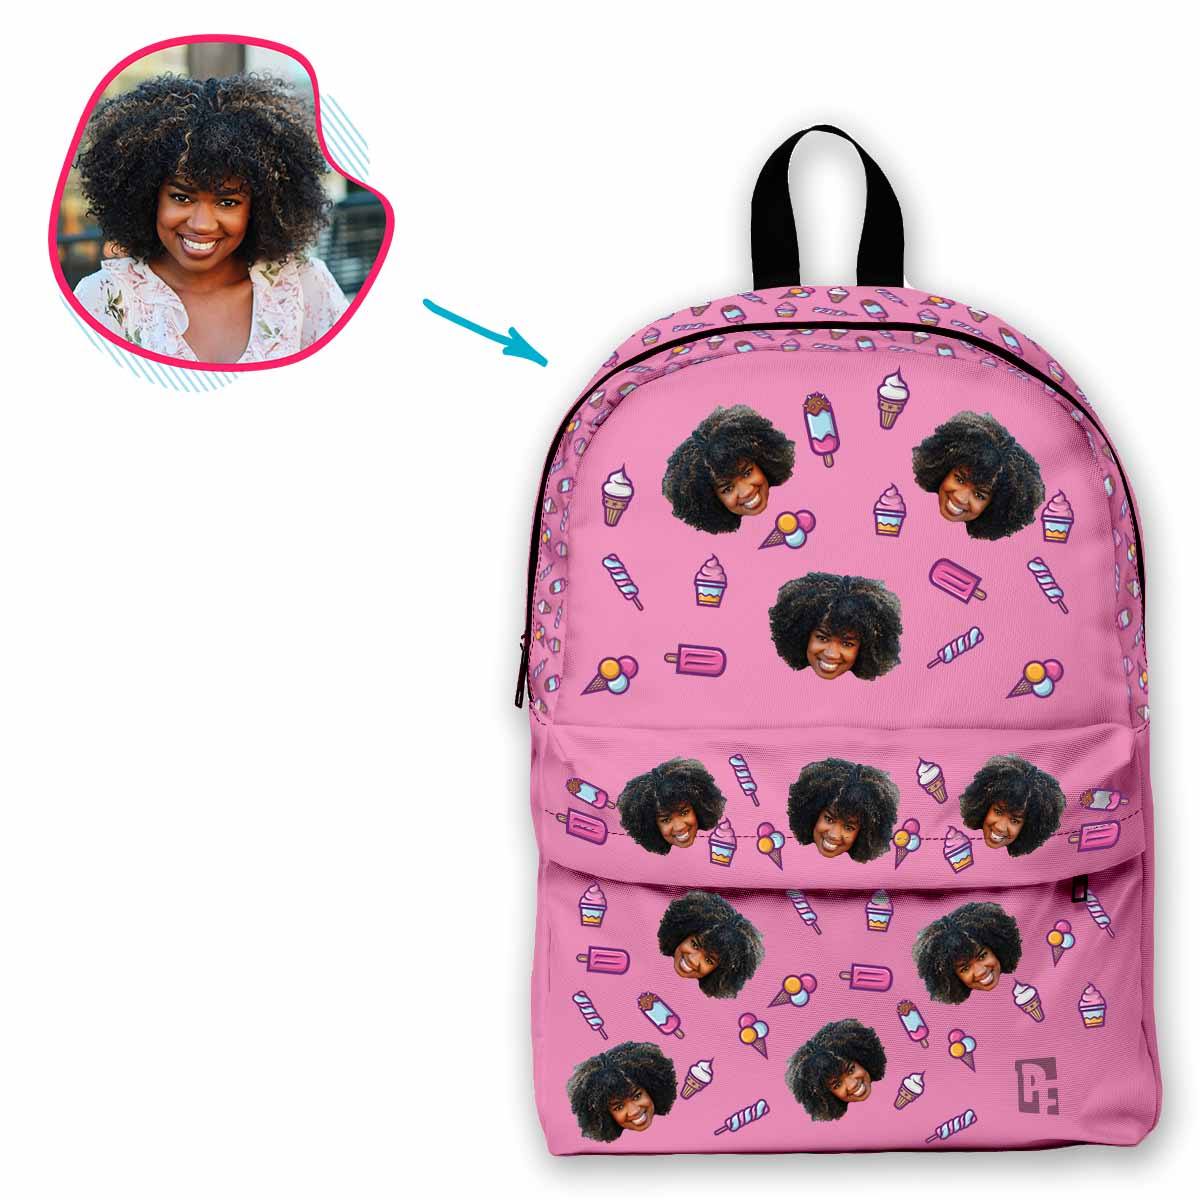 pink Candies classic backpack personalized with photo of face printed on it